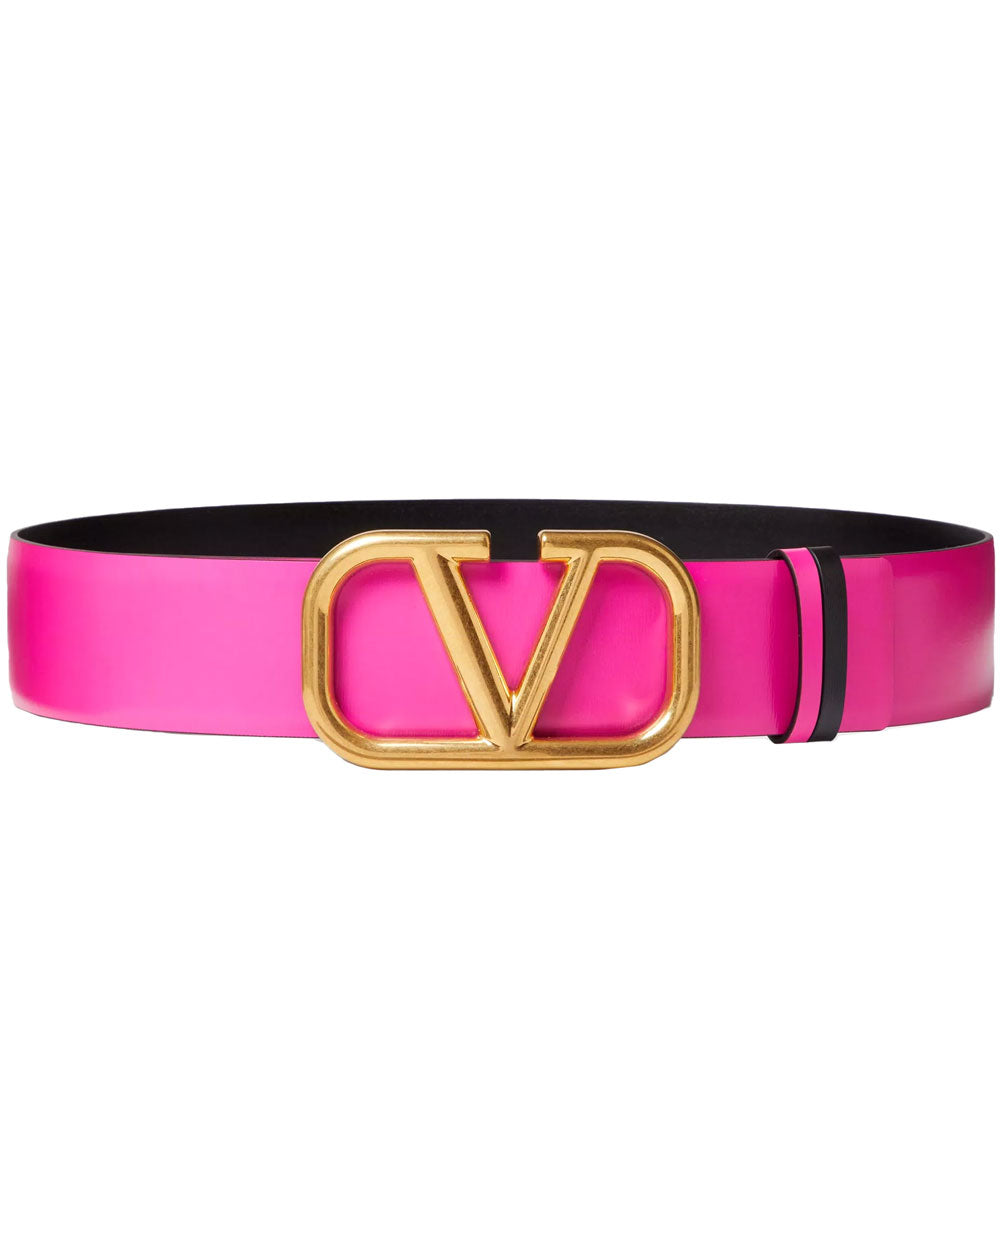 VLOGO Signature Reversible Belt in Pink and Nero